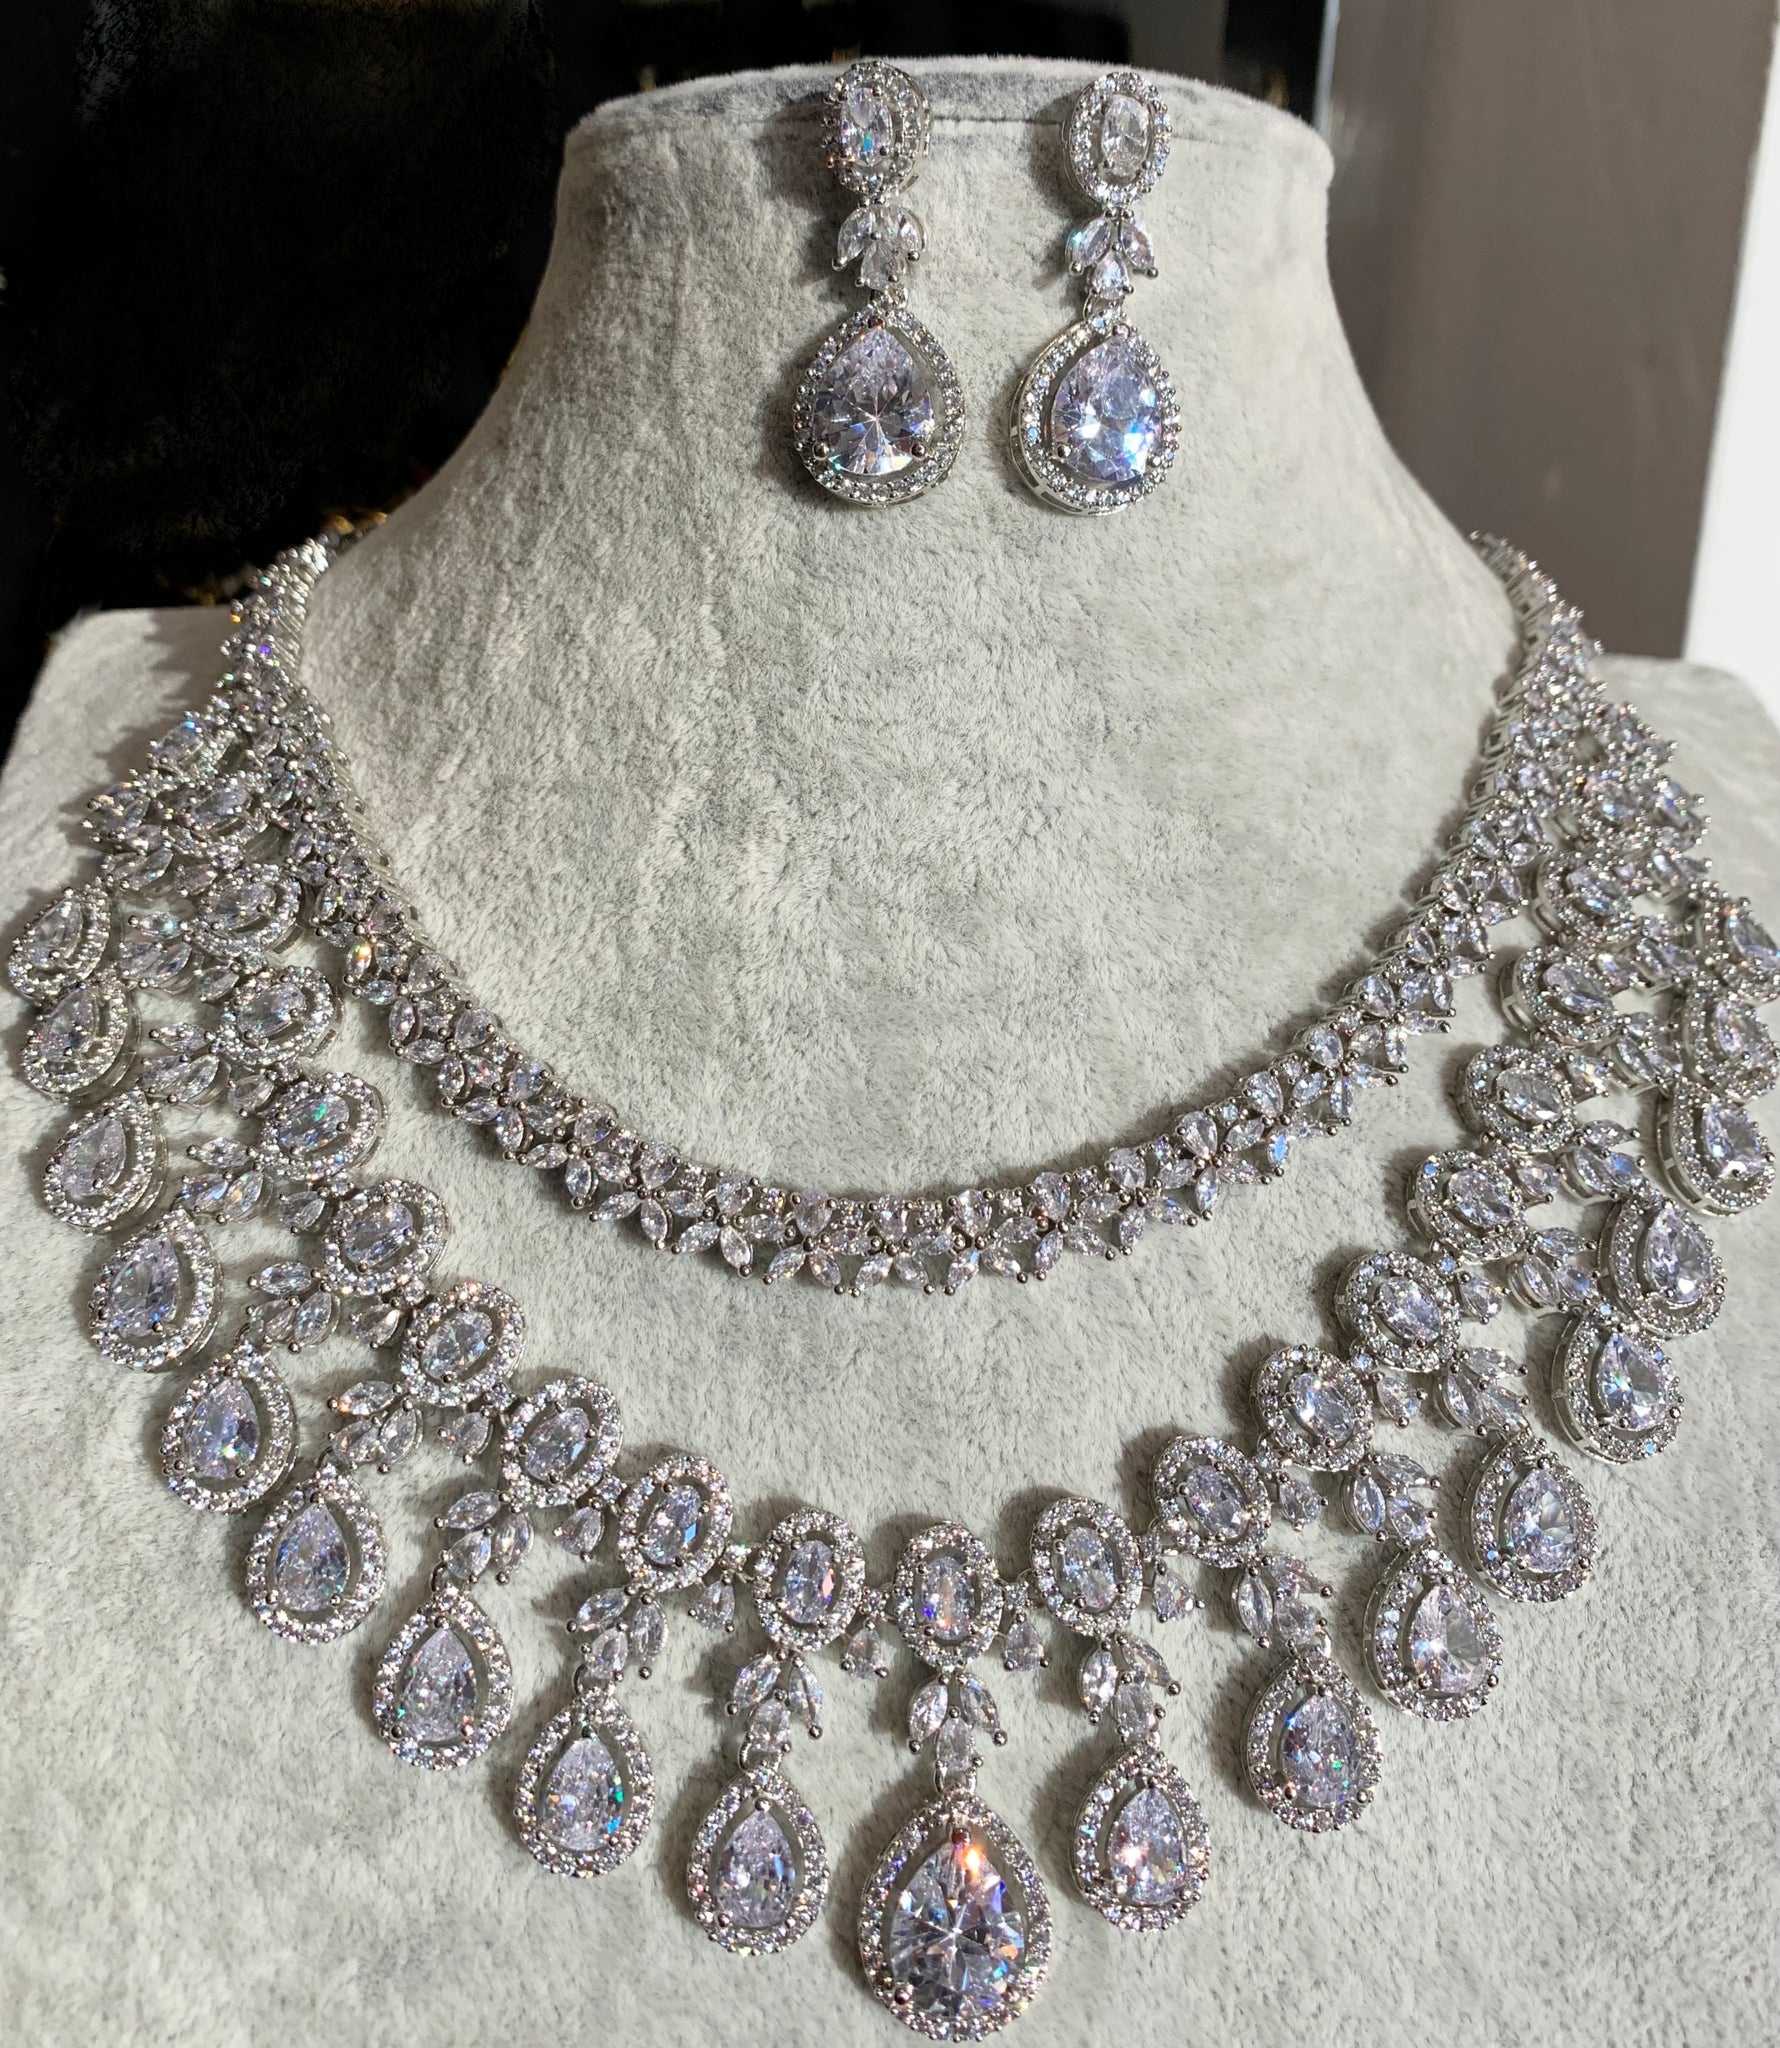 Diamondesque Double Layered Necklace and Earrings Set